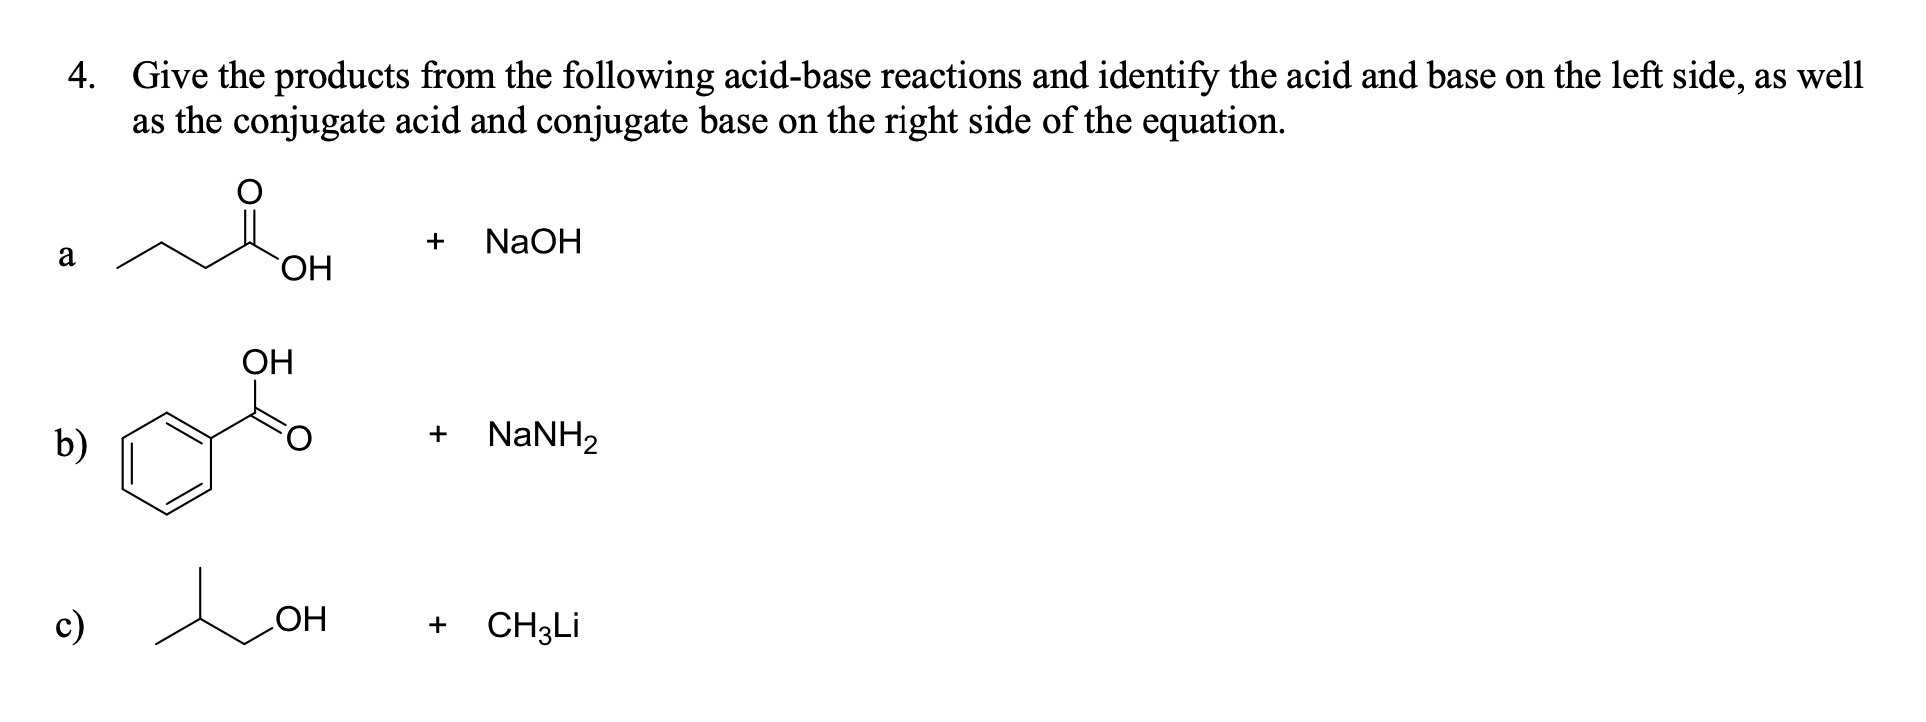 4. Give the products from the following acid-base reactions and identify the acid and base on the left side, as well
as the conjugate acid and conjugate base on the right side of the equation.
+
NaOH
a
ОН
ОН
NaNH2
+
b)
c)
CH3LI
+
НО
